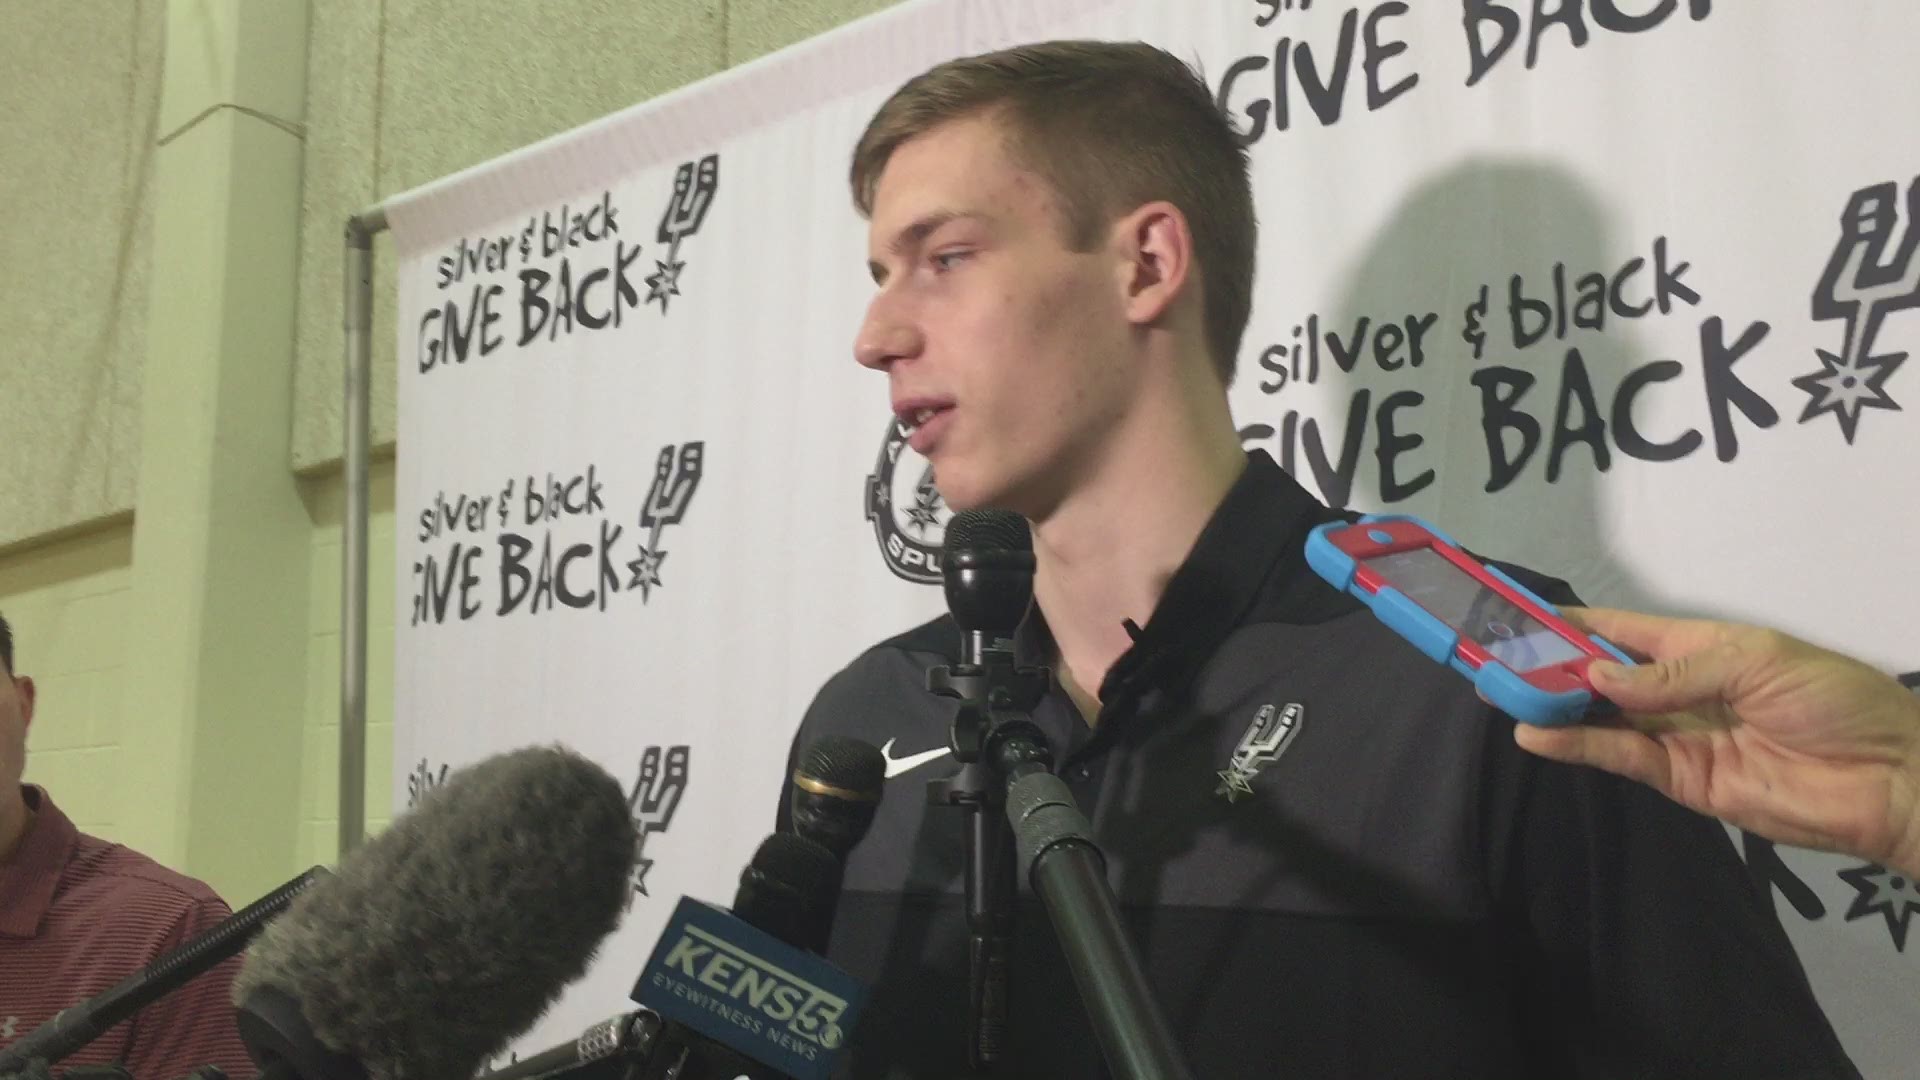 Spurs first-round draft pick Luka Samanic talks about meeting coach Gregg Popovich